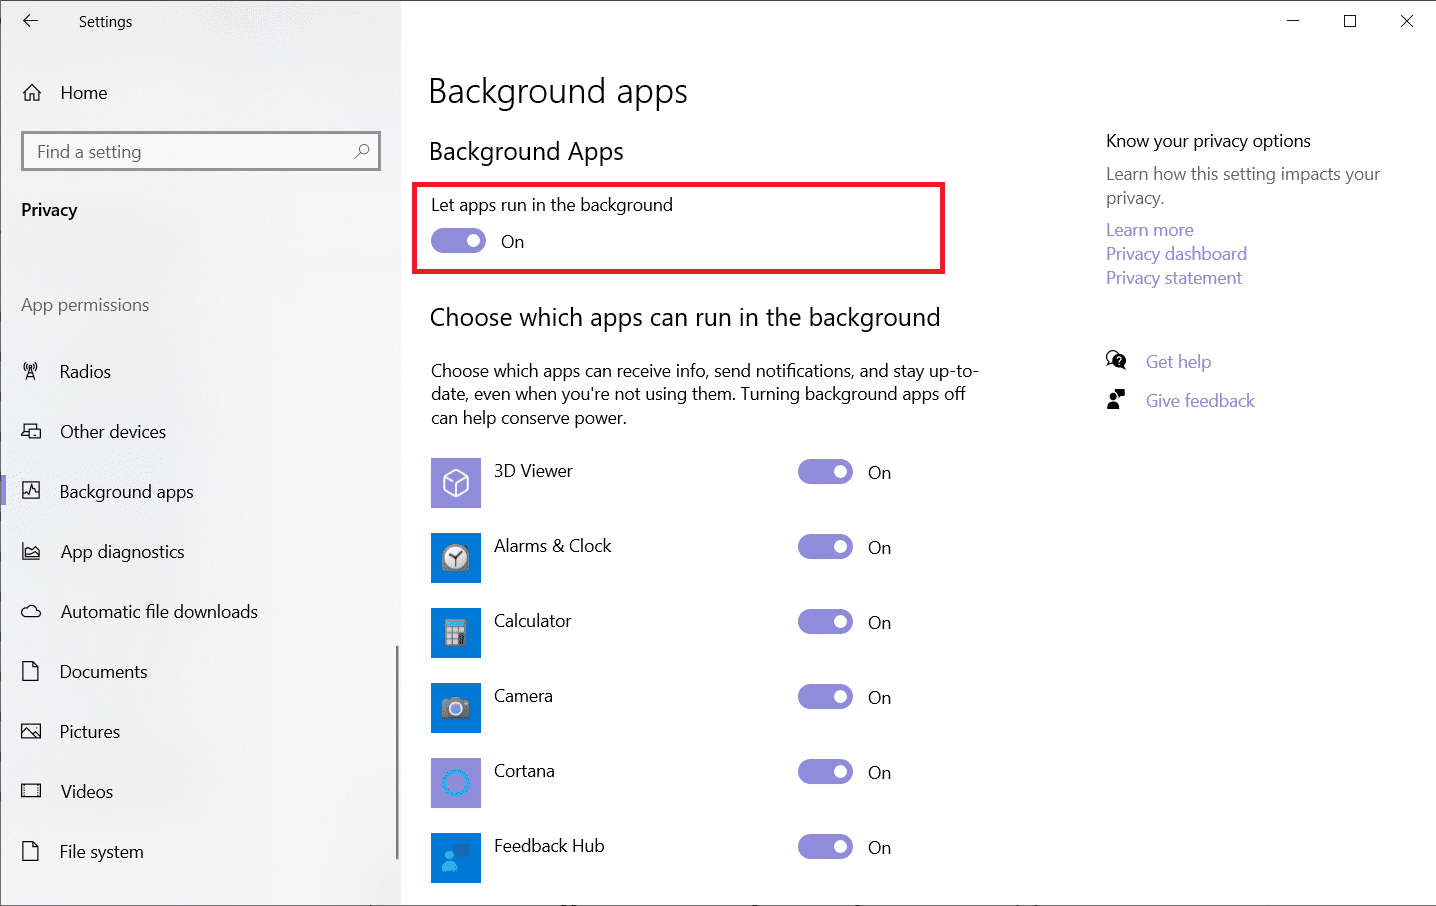 check if the ‘Let apps run in the background’ switch is turned on